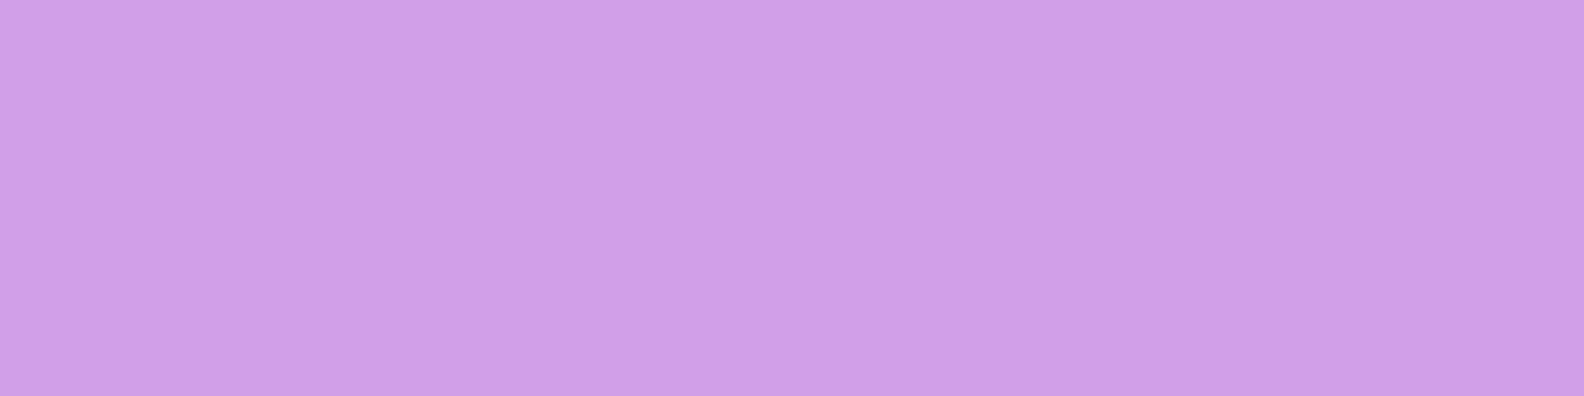 1584x396 Bright Ube Solid Color Background